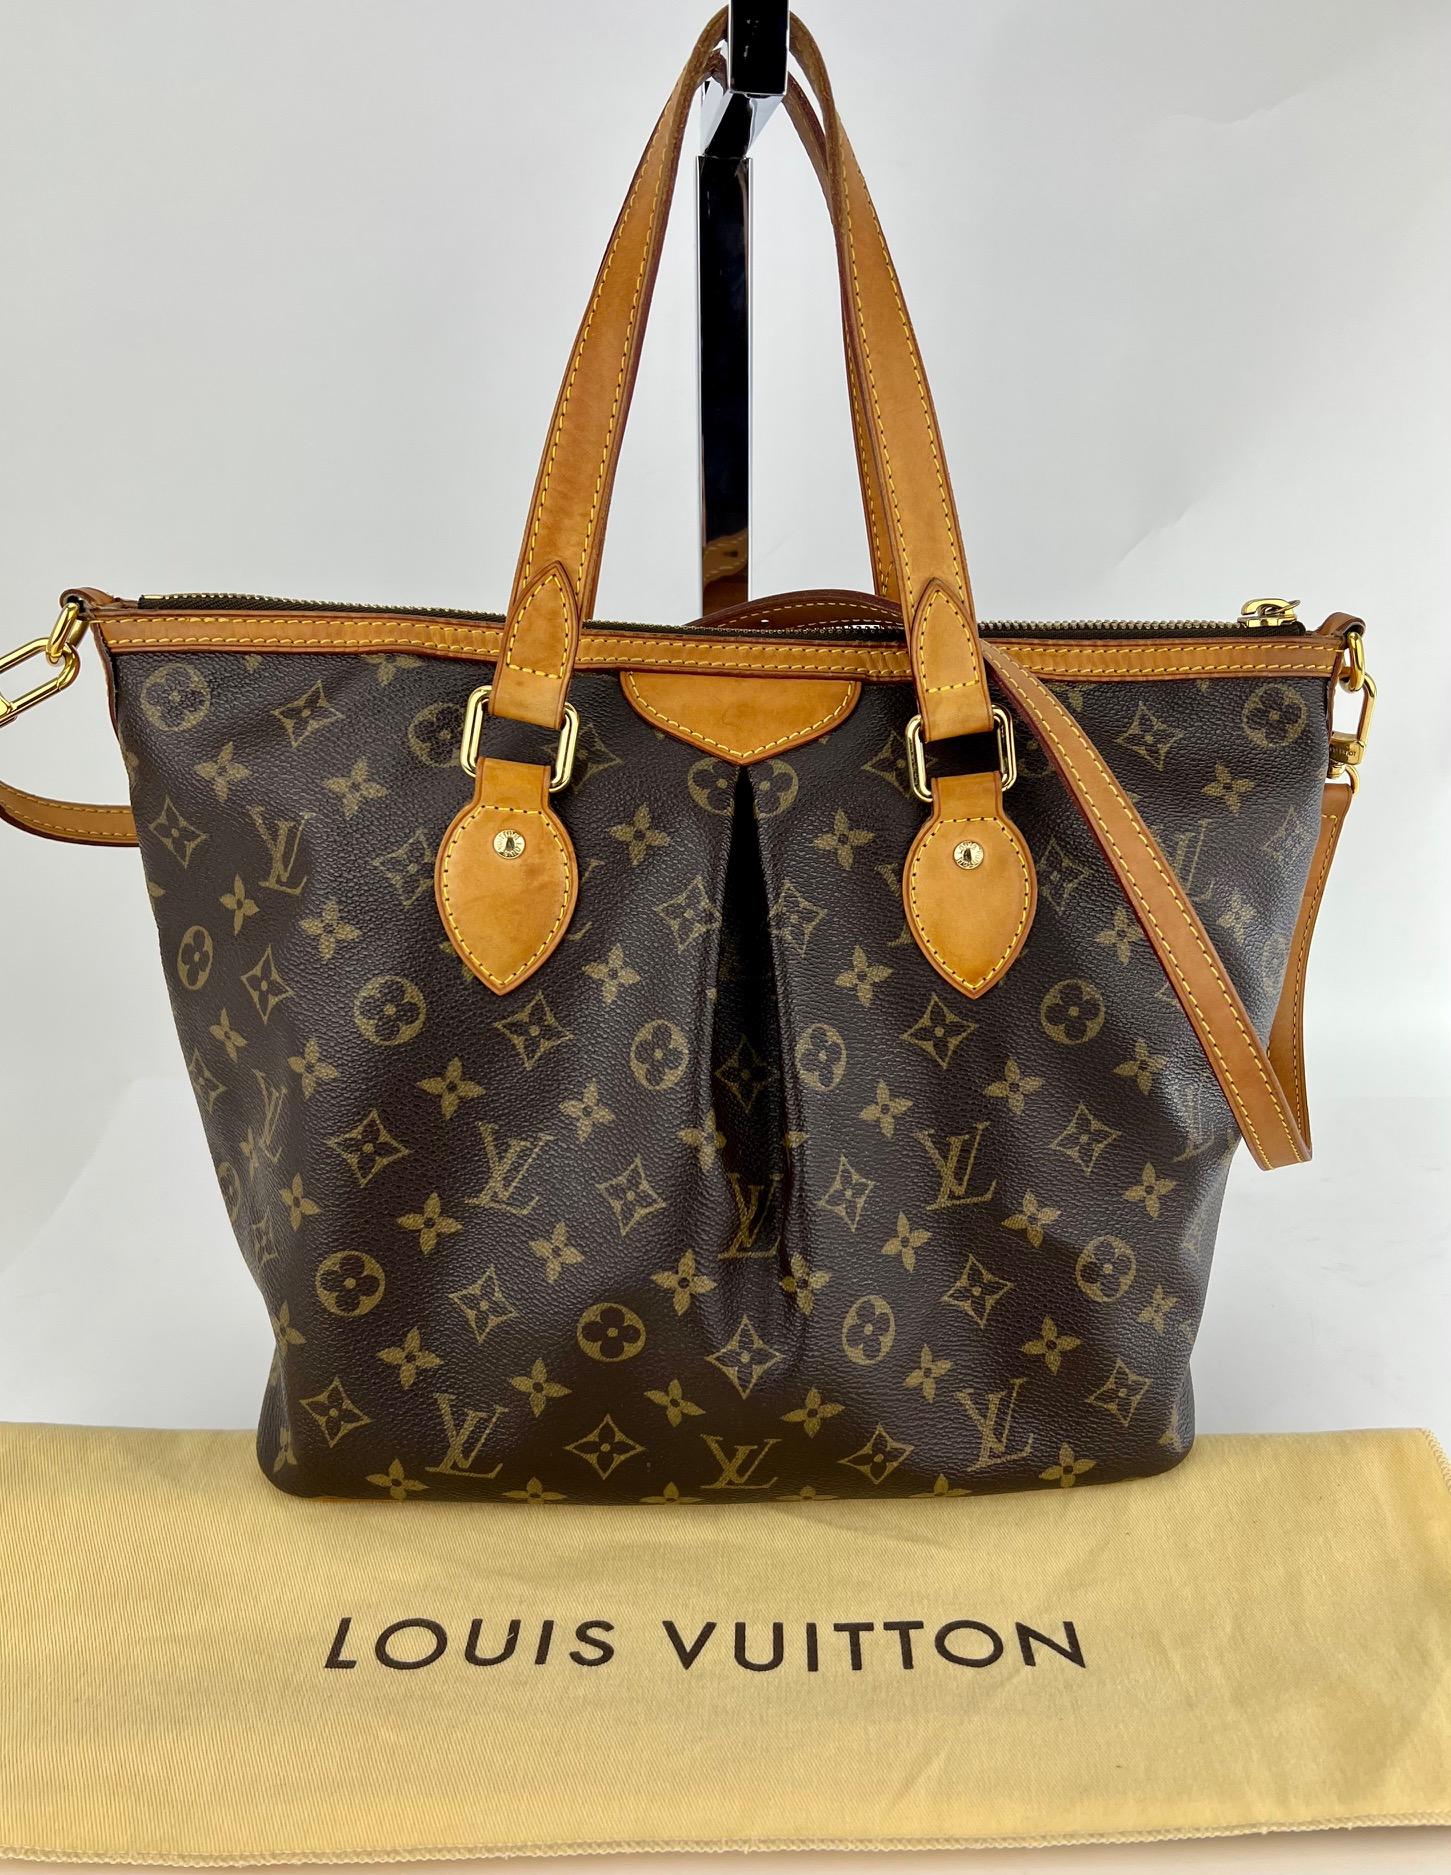 Pre-Owned  100% Authentic
Louis Vuitton Palermo PM Monogram Canvas Bag
W/added insert to help keep upright and Organize
RATING: B    very good, well maintained, shows
minor signs of wear 
MATERIAL: monogram canvas, leather
HANDLE: double leather,